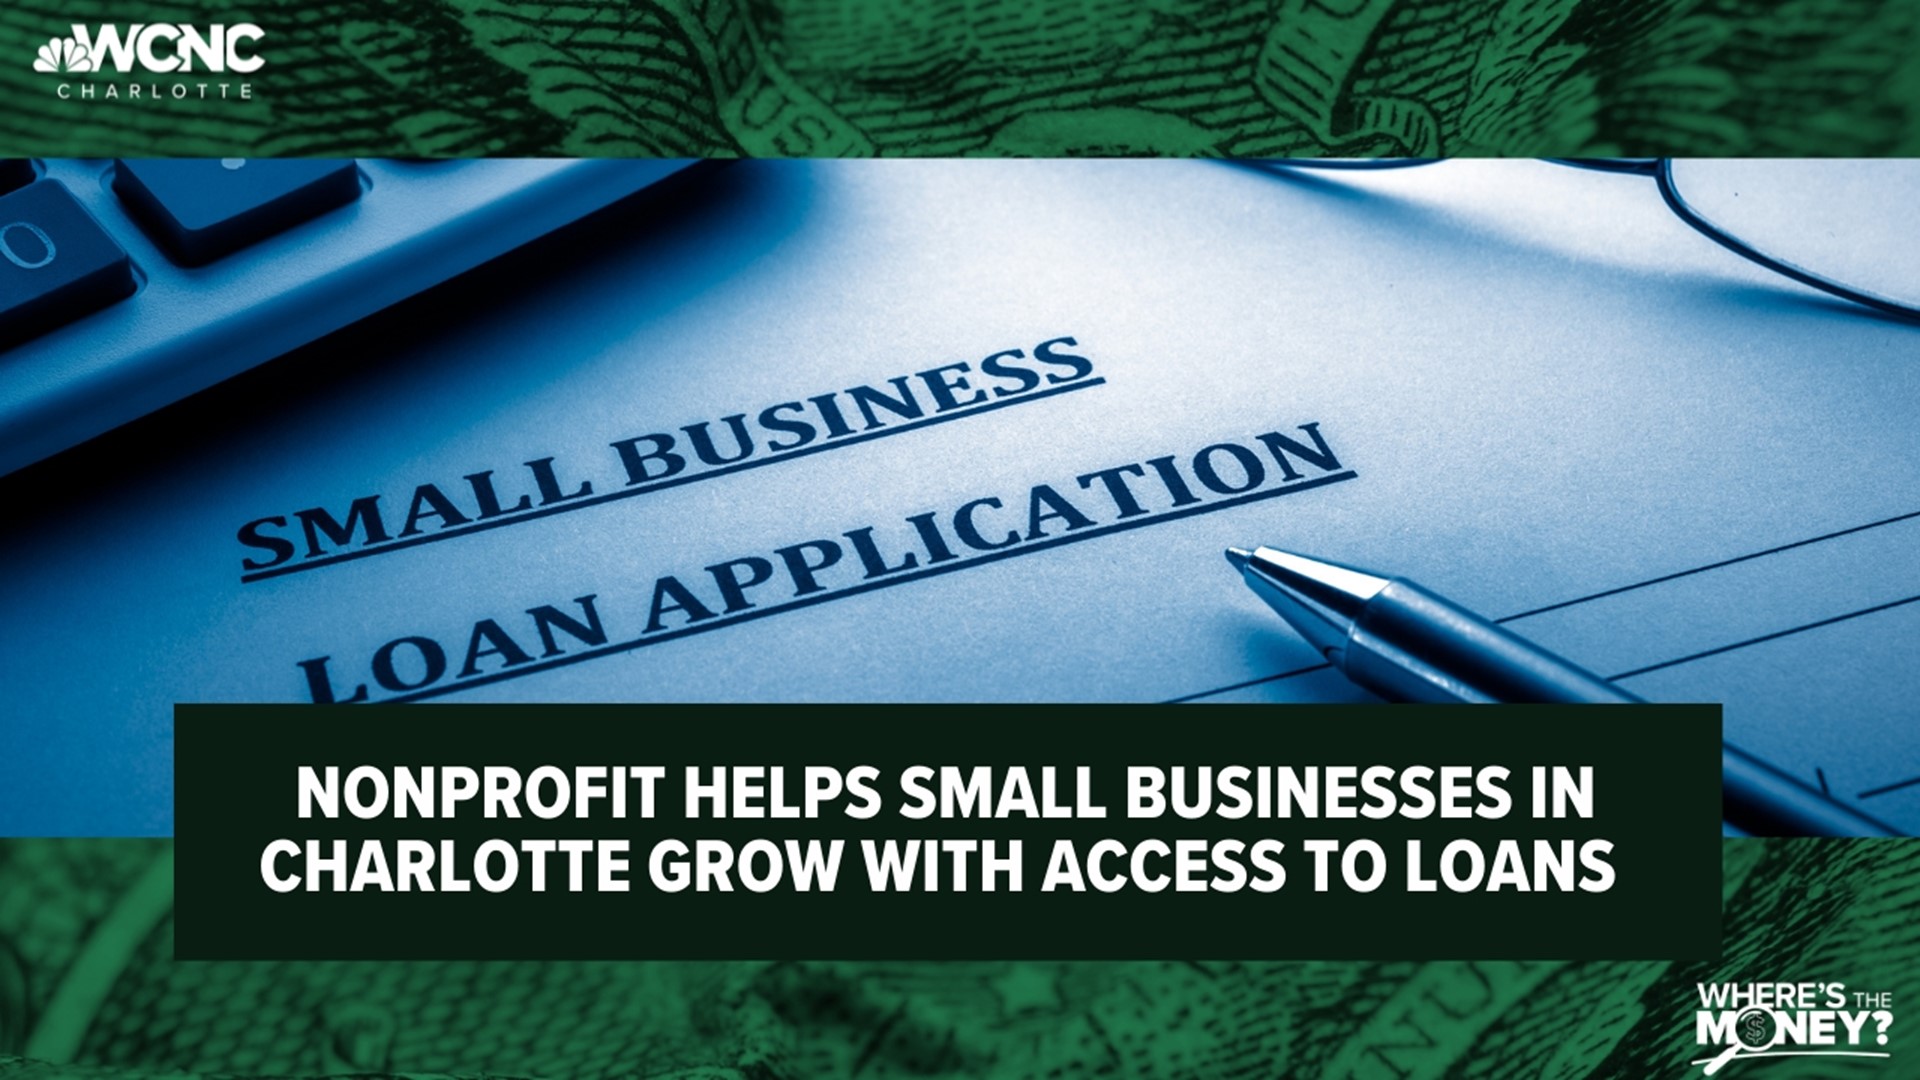 The Business Expansion Funding Corporation loans money to small businesses looking to buy property or new equipment.